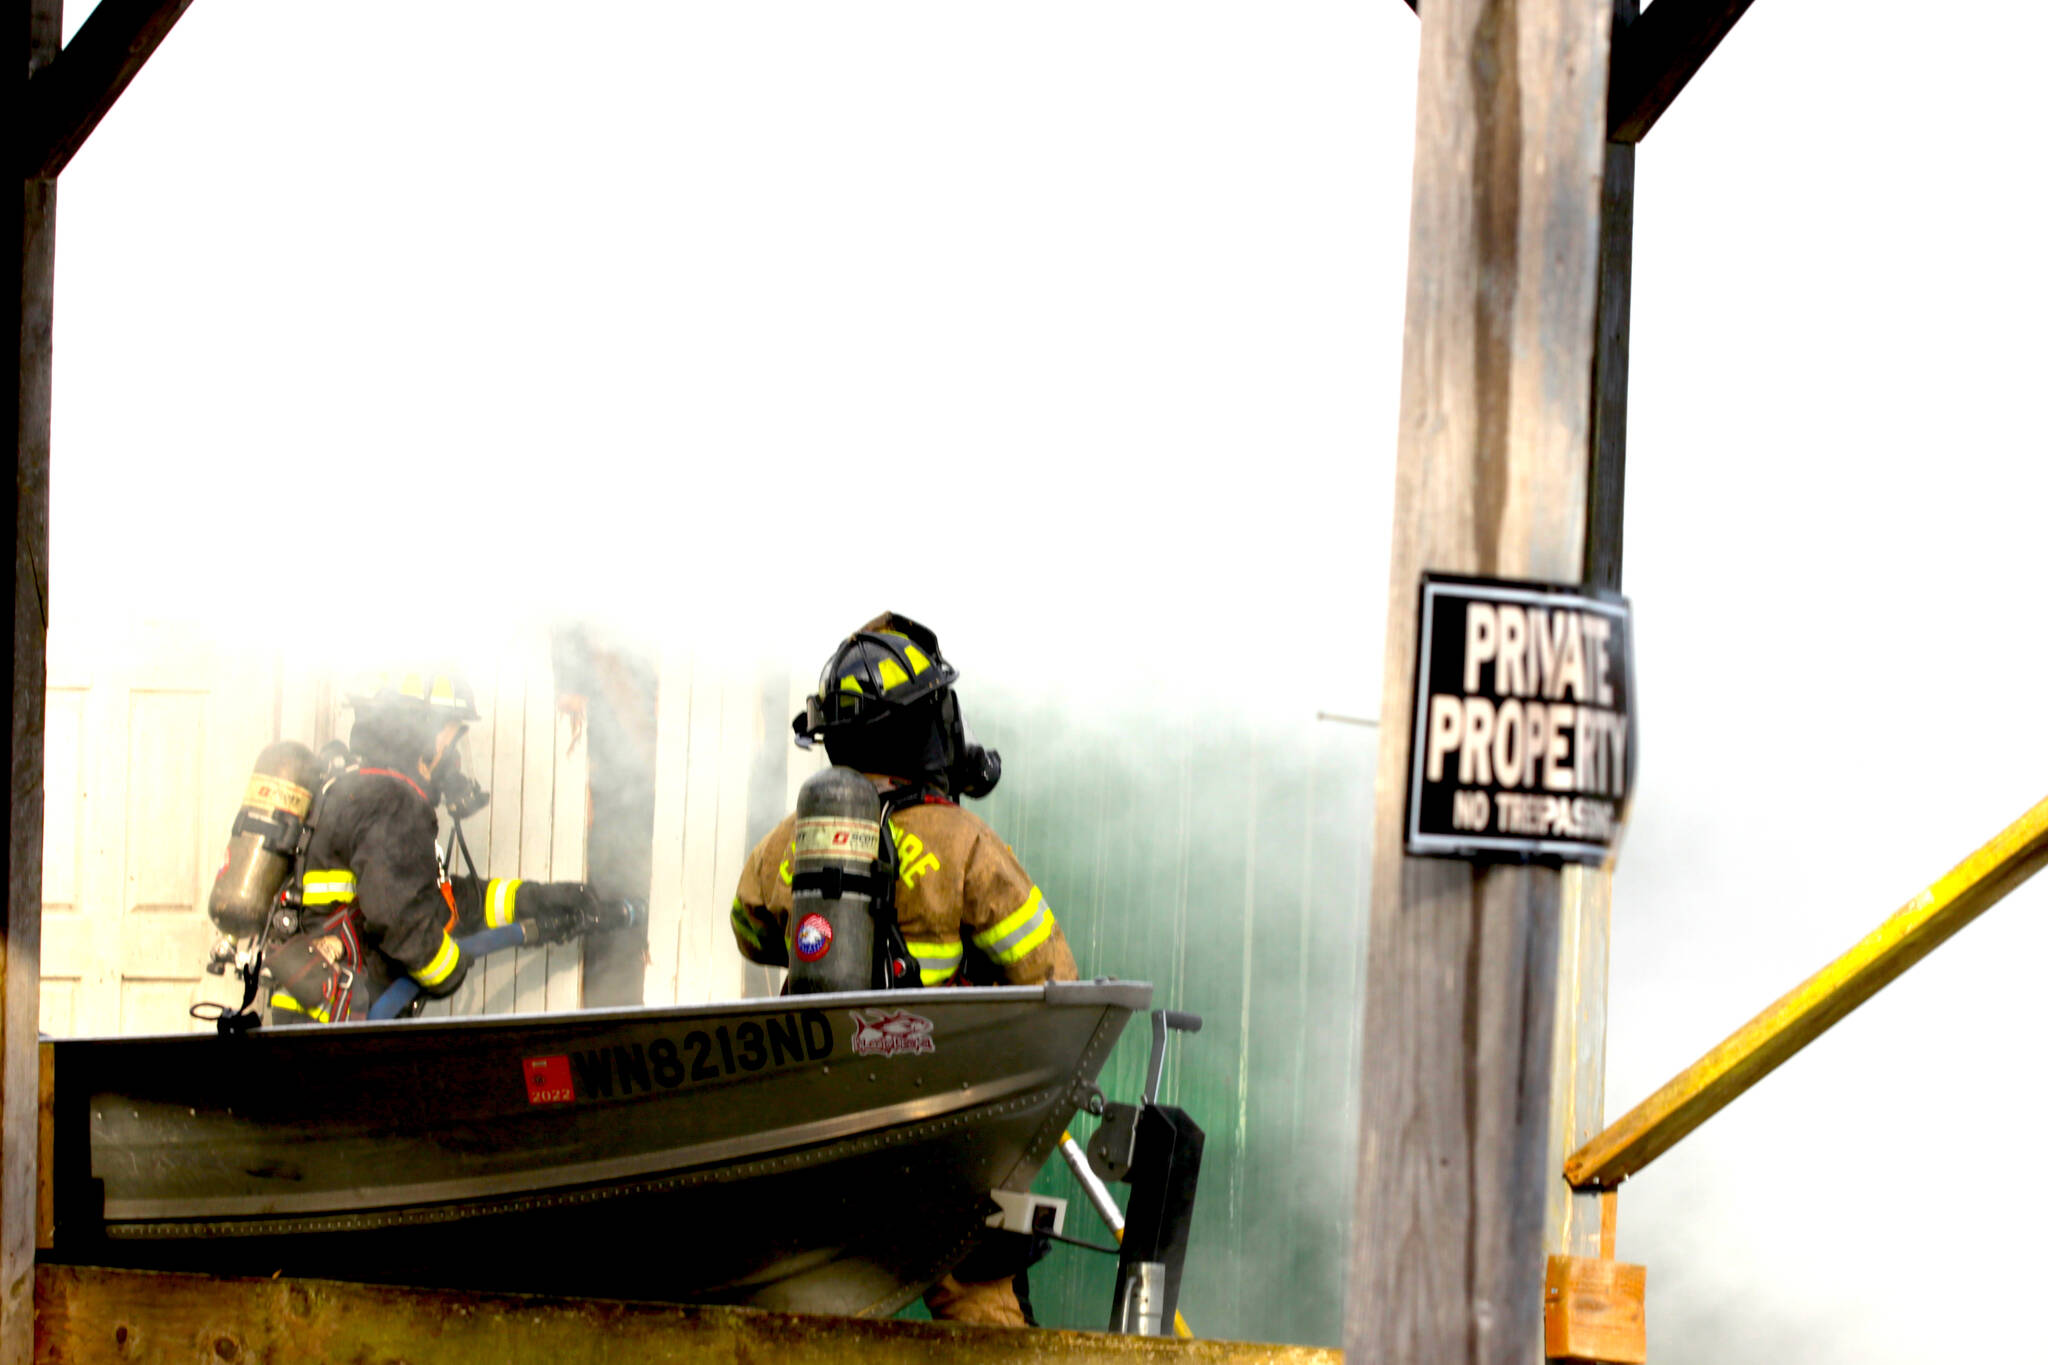 Firefighters peer through heavy smoke at a structure fire in Elma on Nov. 15. (Michael S. Lockett / The Daily World)